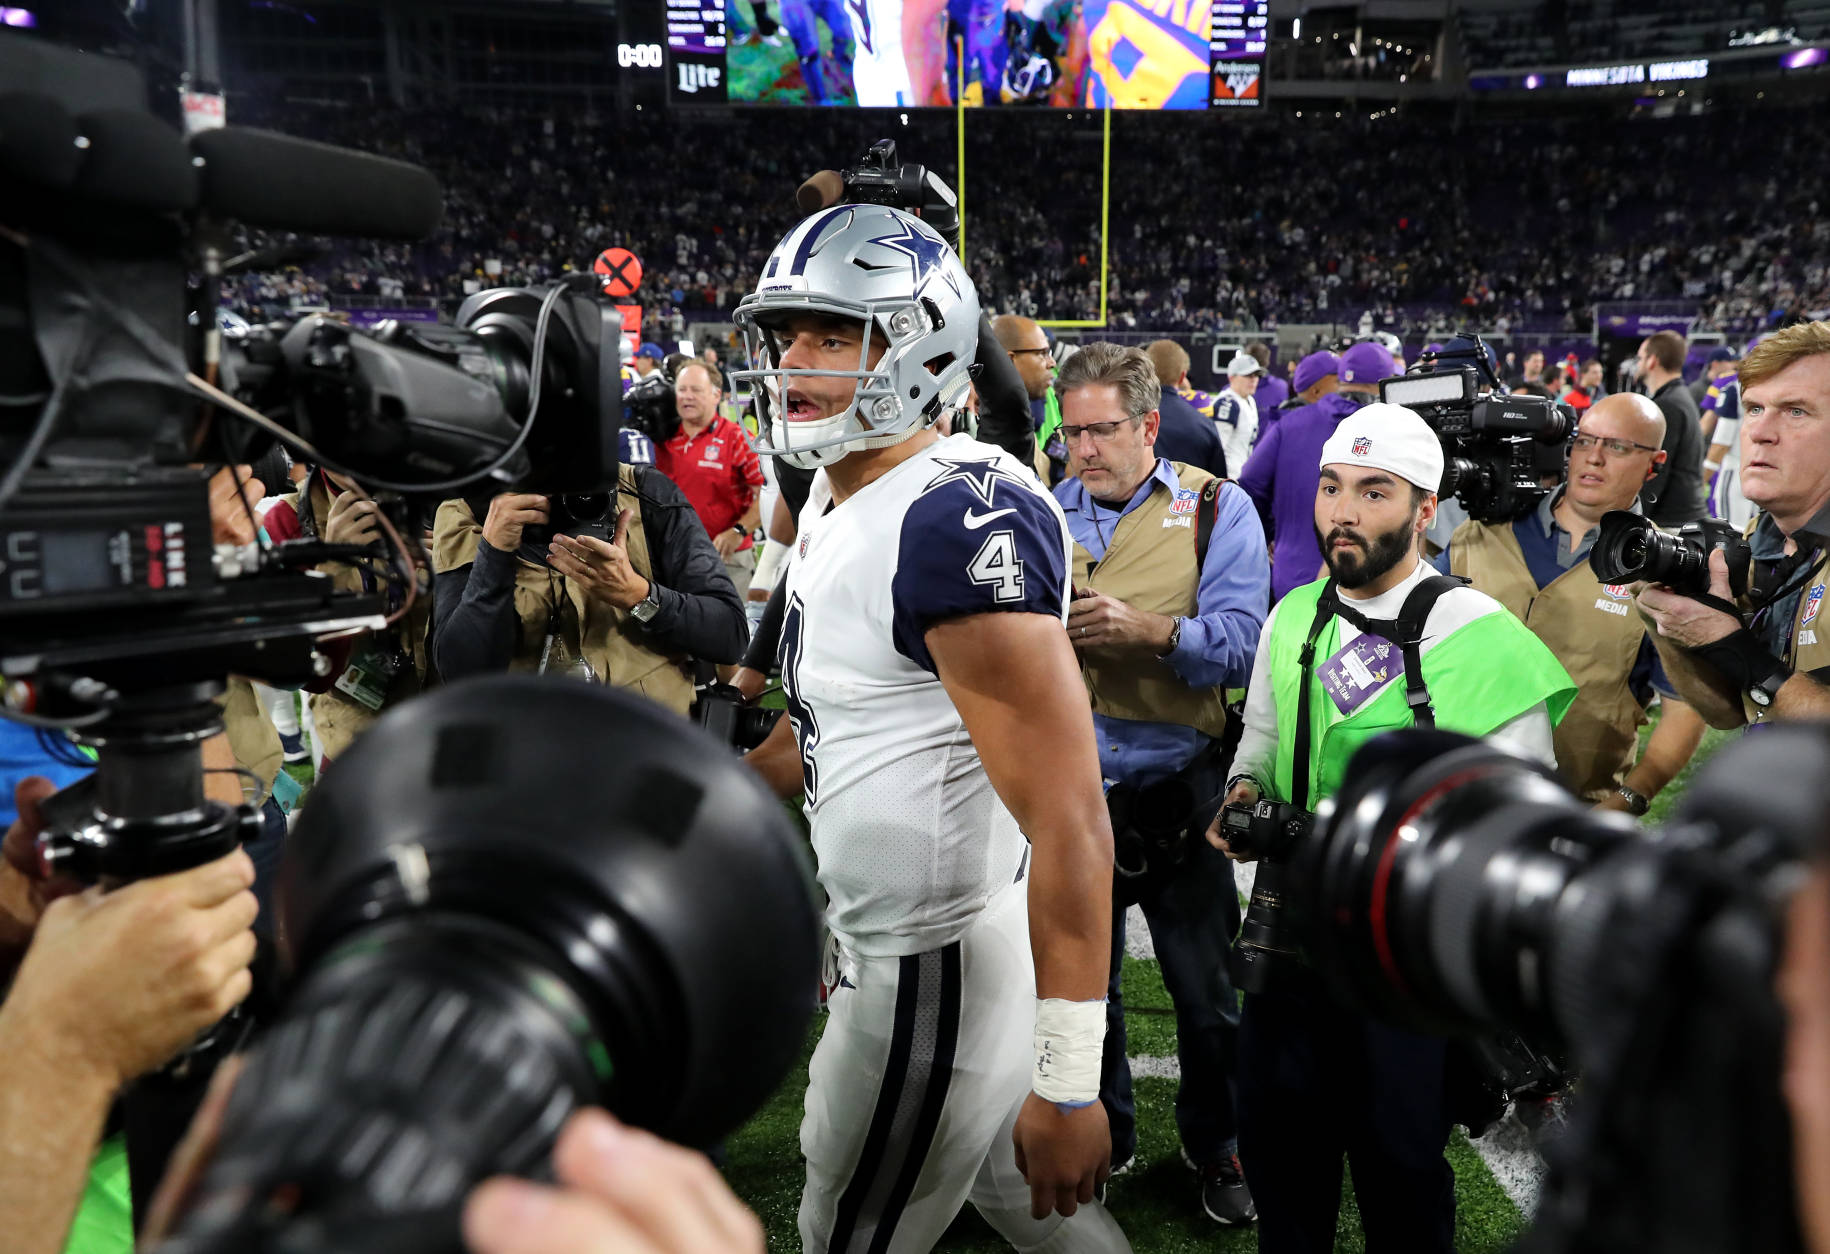 MINNEAPOLIS, MN - DECEMBER 1: Dak Prescott #4 of the Dallas Cowboys is surrounded by cameras after the game against the Minnesota Vikings on December 1, 2016 at US Bank Stadium in Minneapolis, Minnesota. The Cowboys defeated the Vikings 17-15. (Photo by Adam Bettcher/Getty Images)